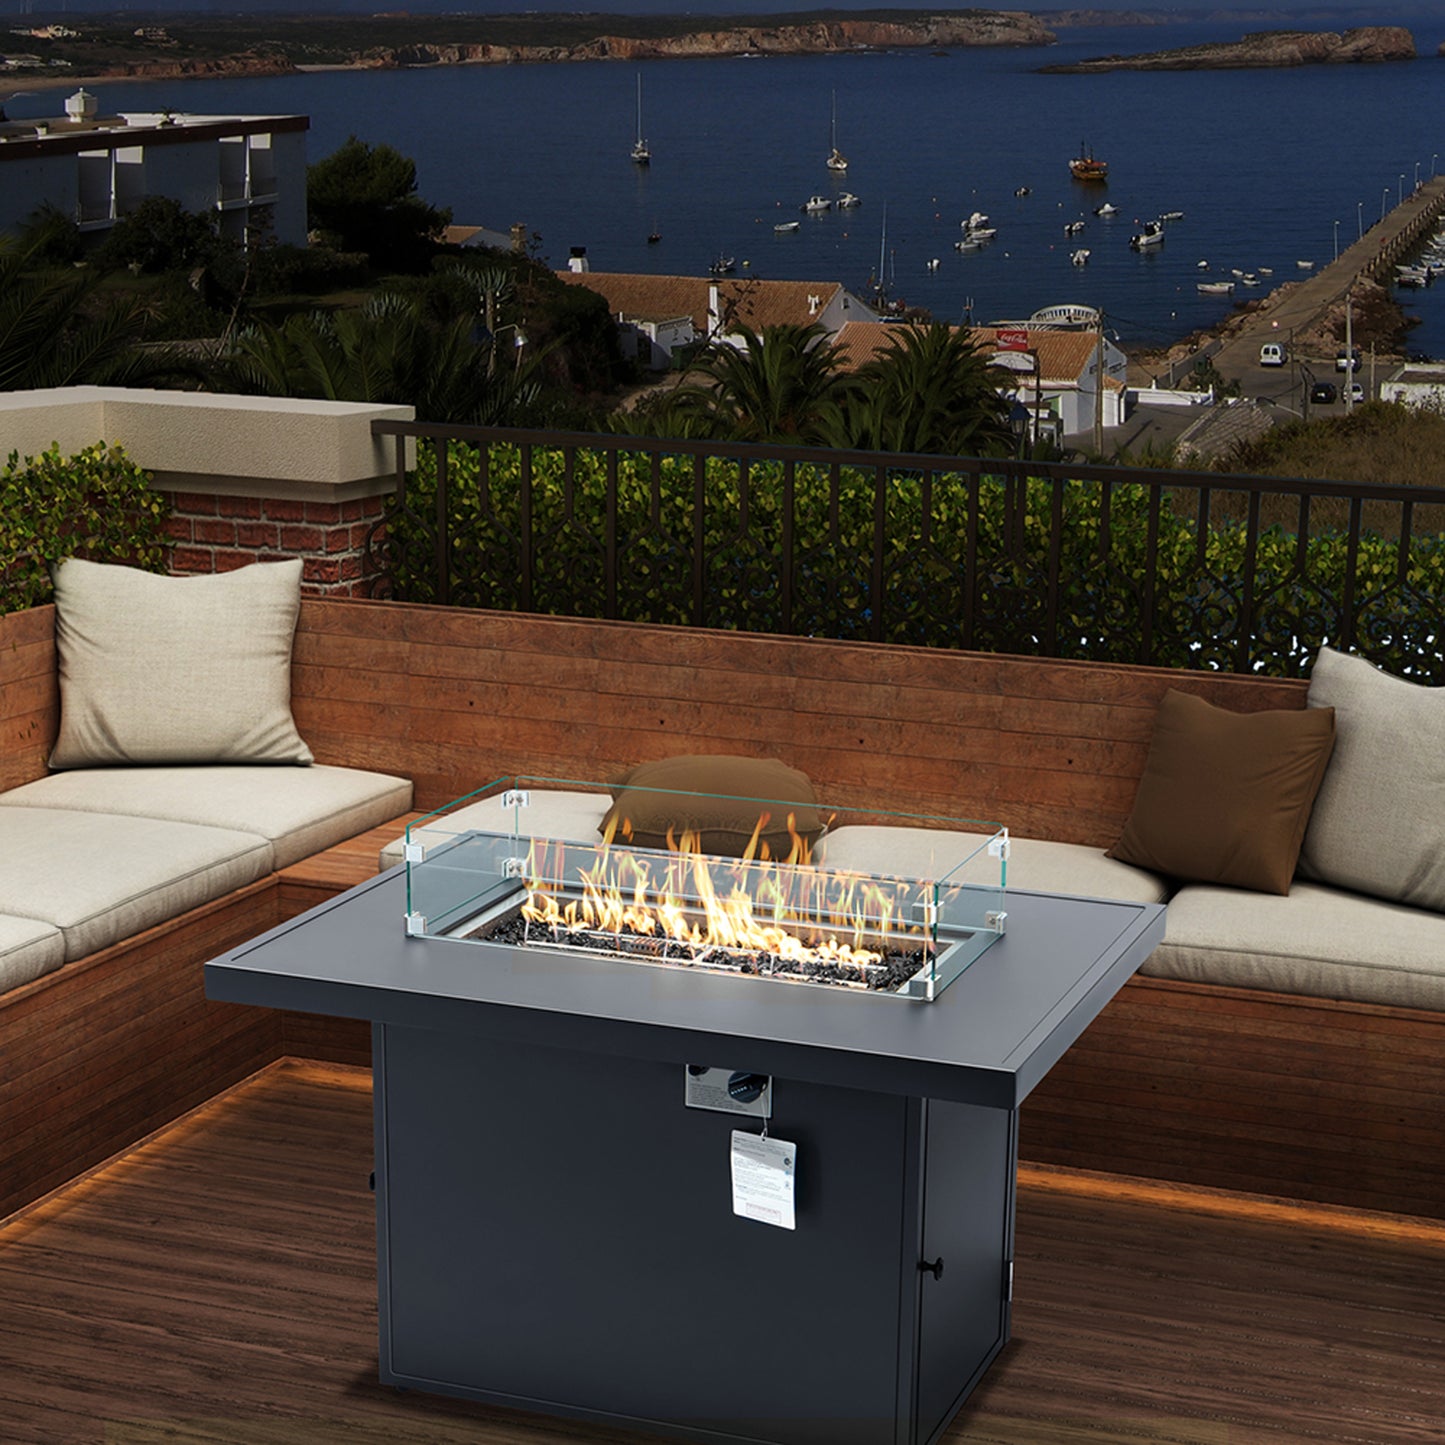 44 inch Gas Fire Pit Table, SYNGAR 2-in-1 55,000 BTU Propane Gas Fire Pit Table, Outdoor Propane Fire Pit with Glass Wind Guard, Black Rocks and Lid, for Patio, Backyard, Garden, Poolside, C03